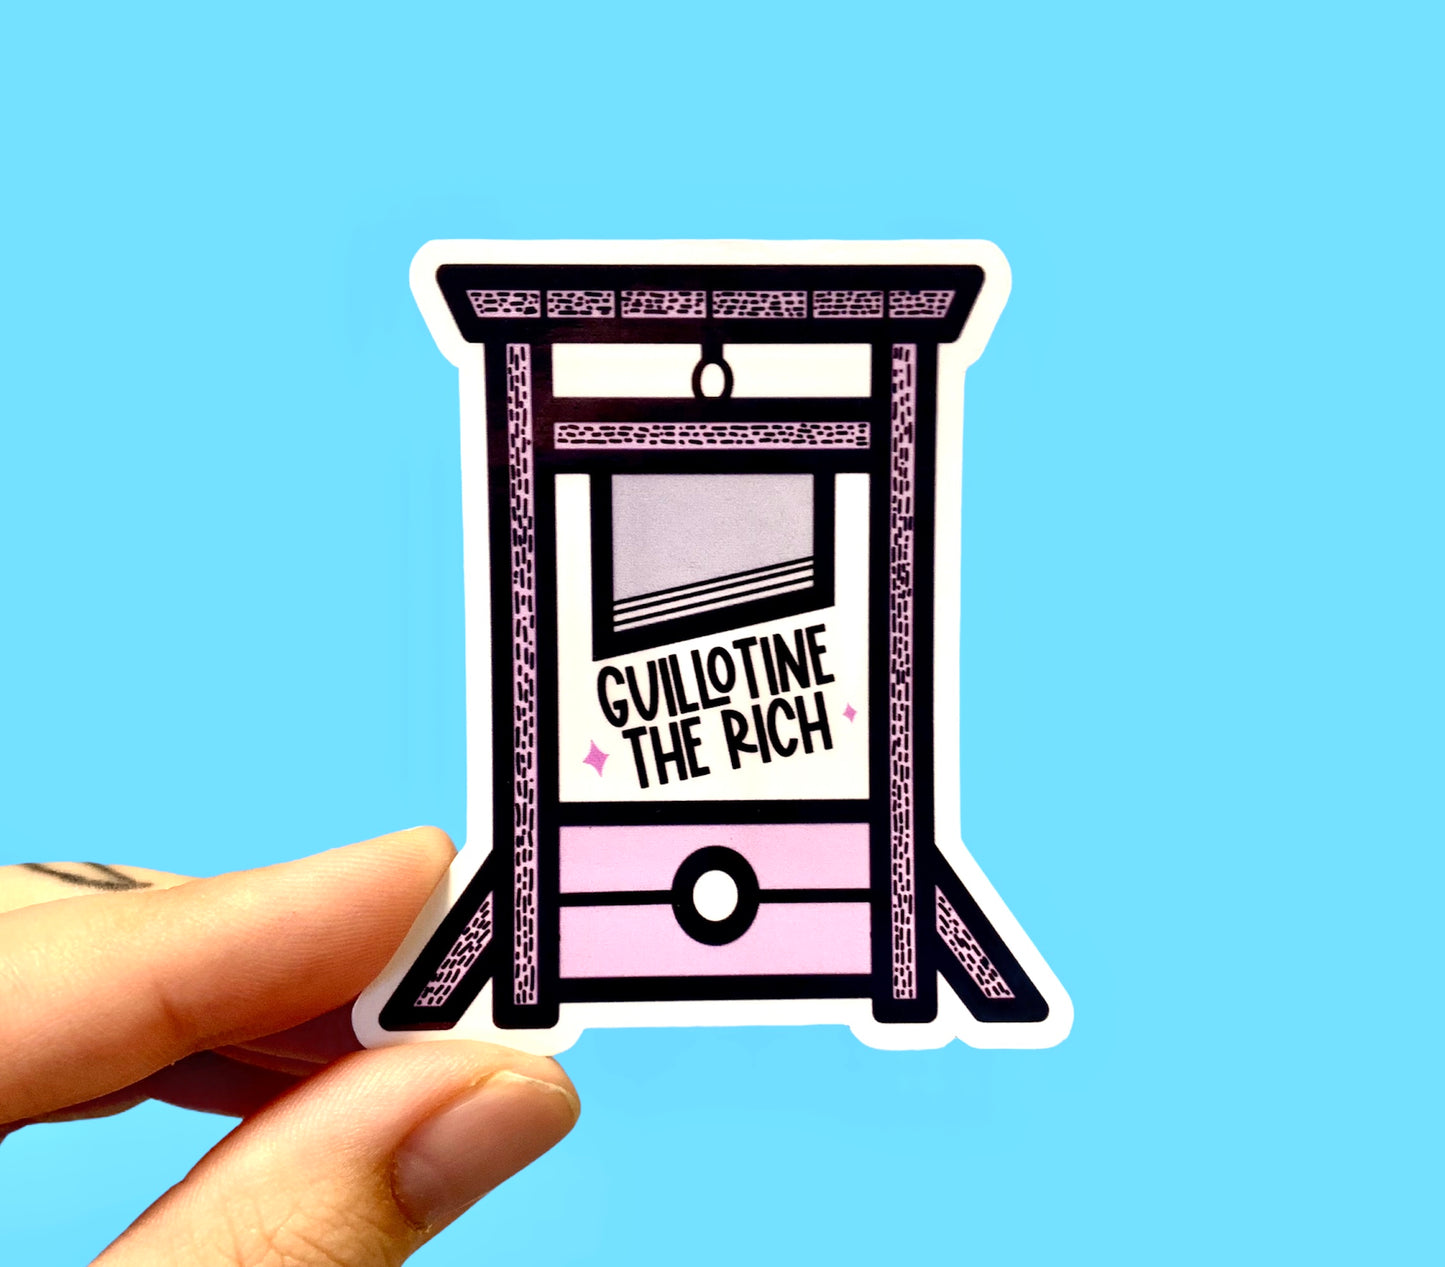 Guillotine the rich (pack of 3 or 5 stickers)